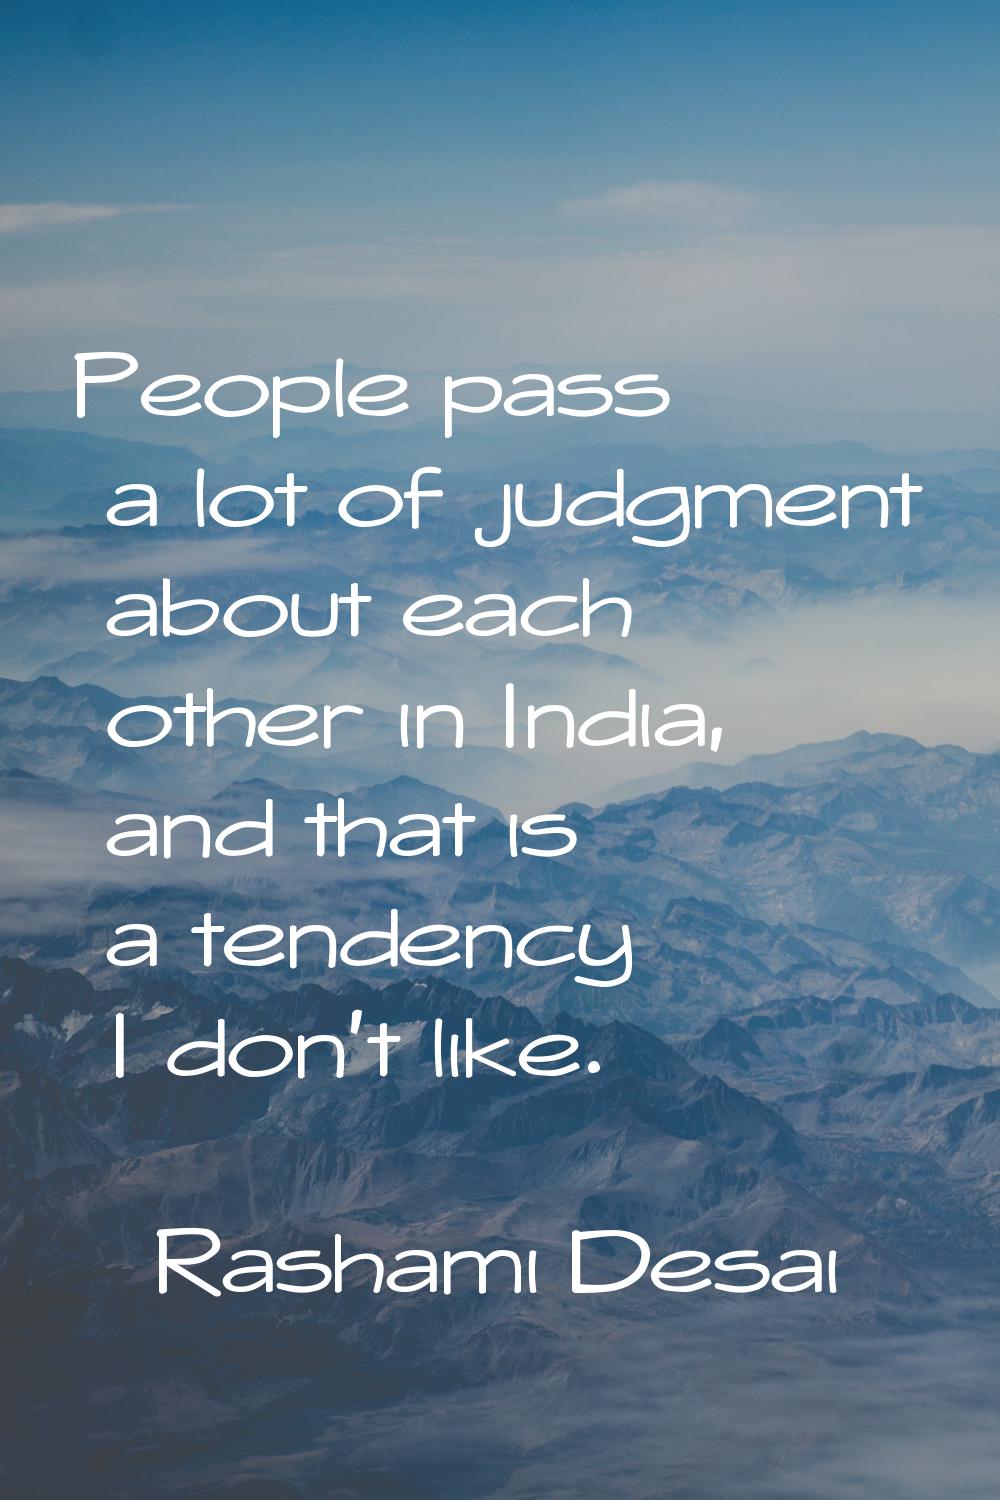 People pass a lot of judgment about each other in India, and that is a tendency I don't like.